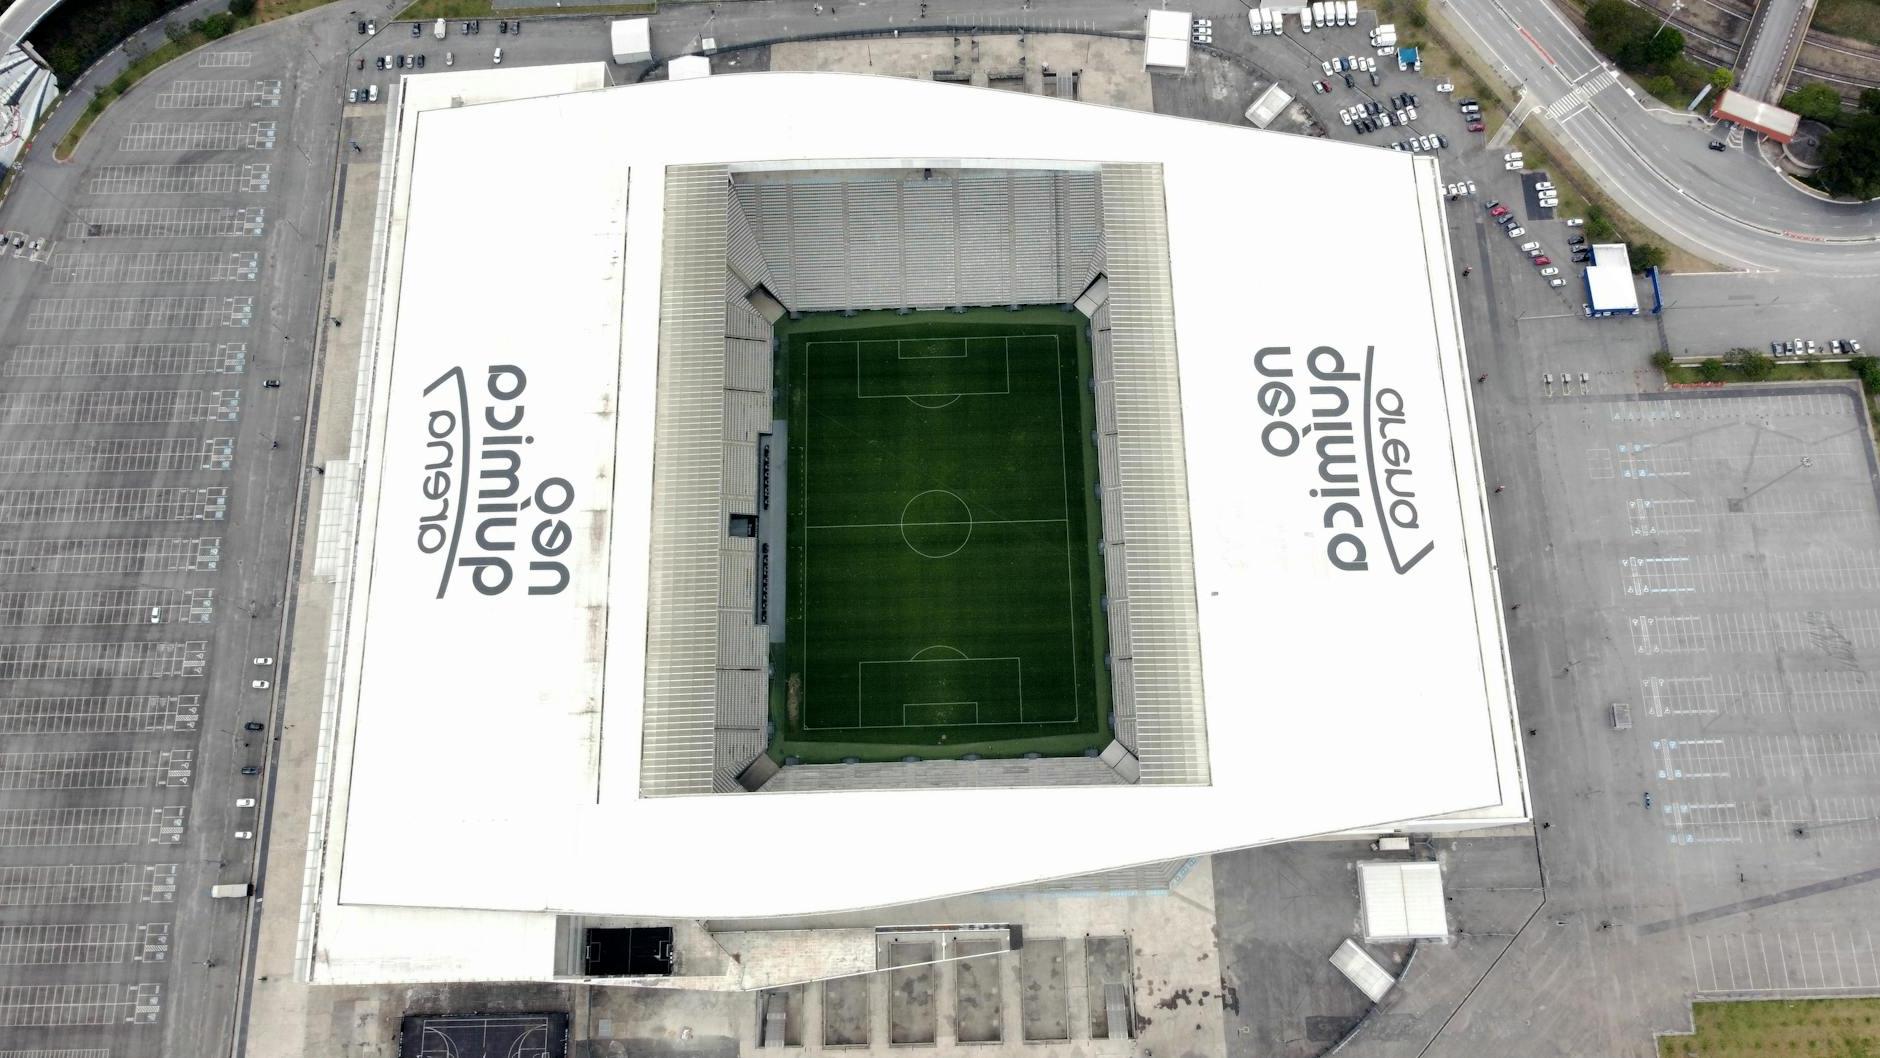 An aerial view of a soccer stadium with a green field